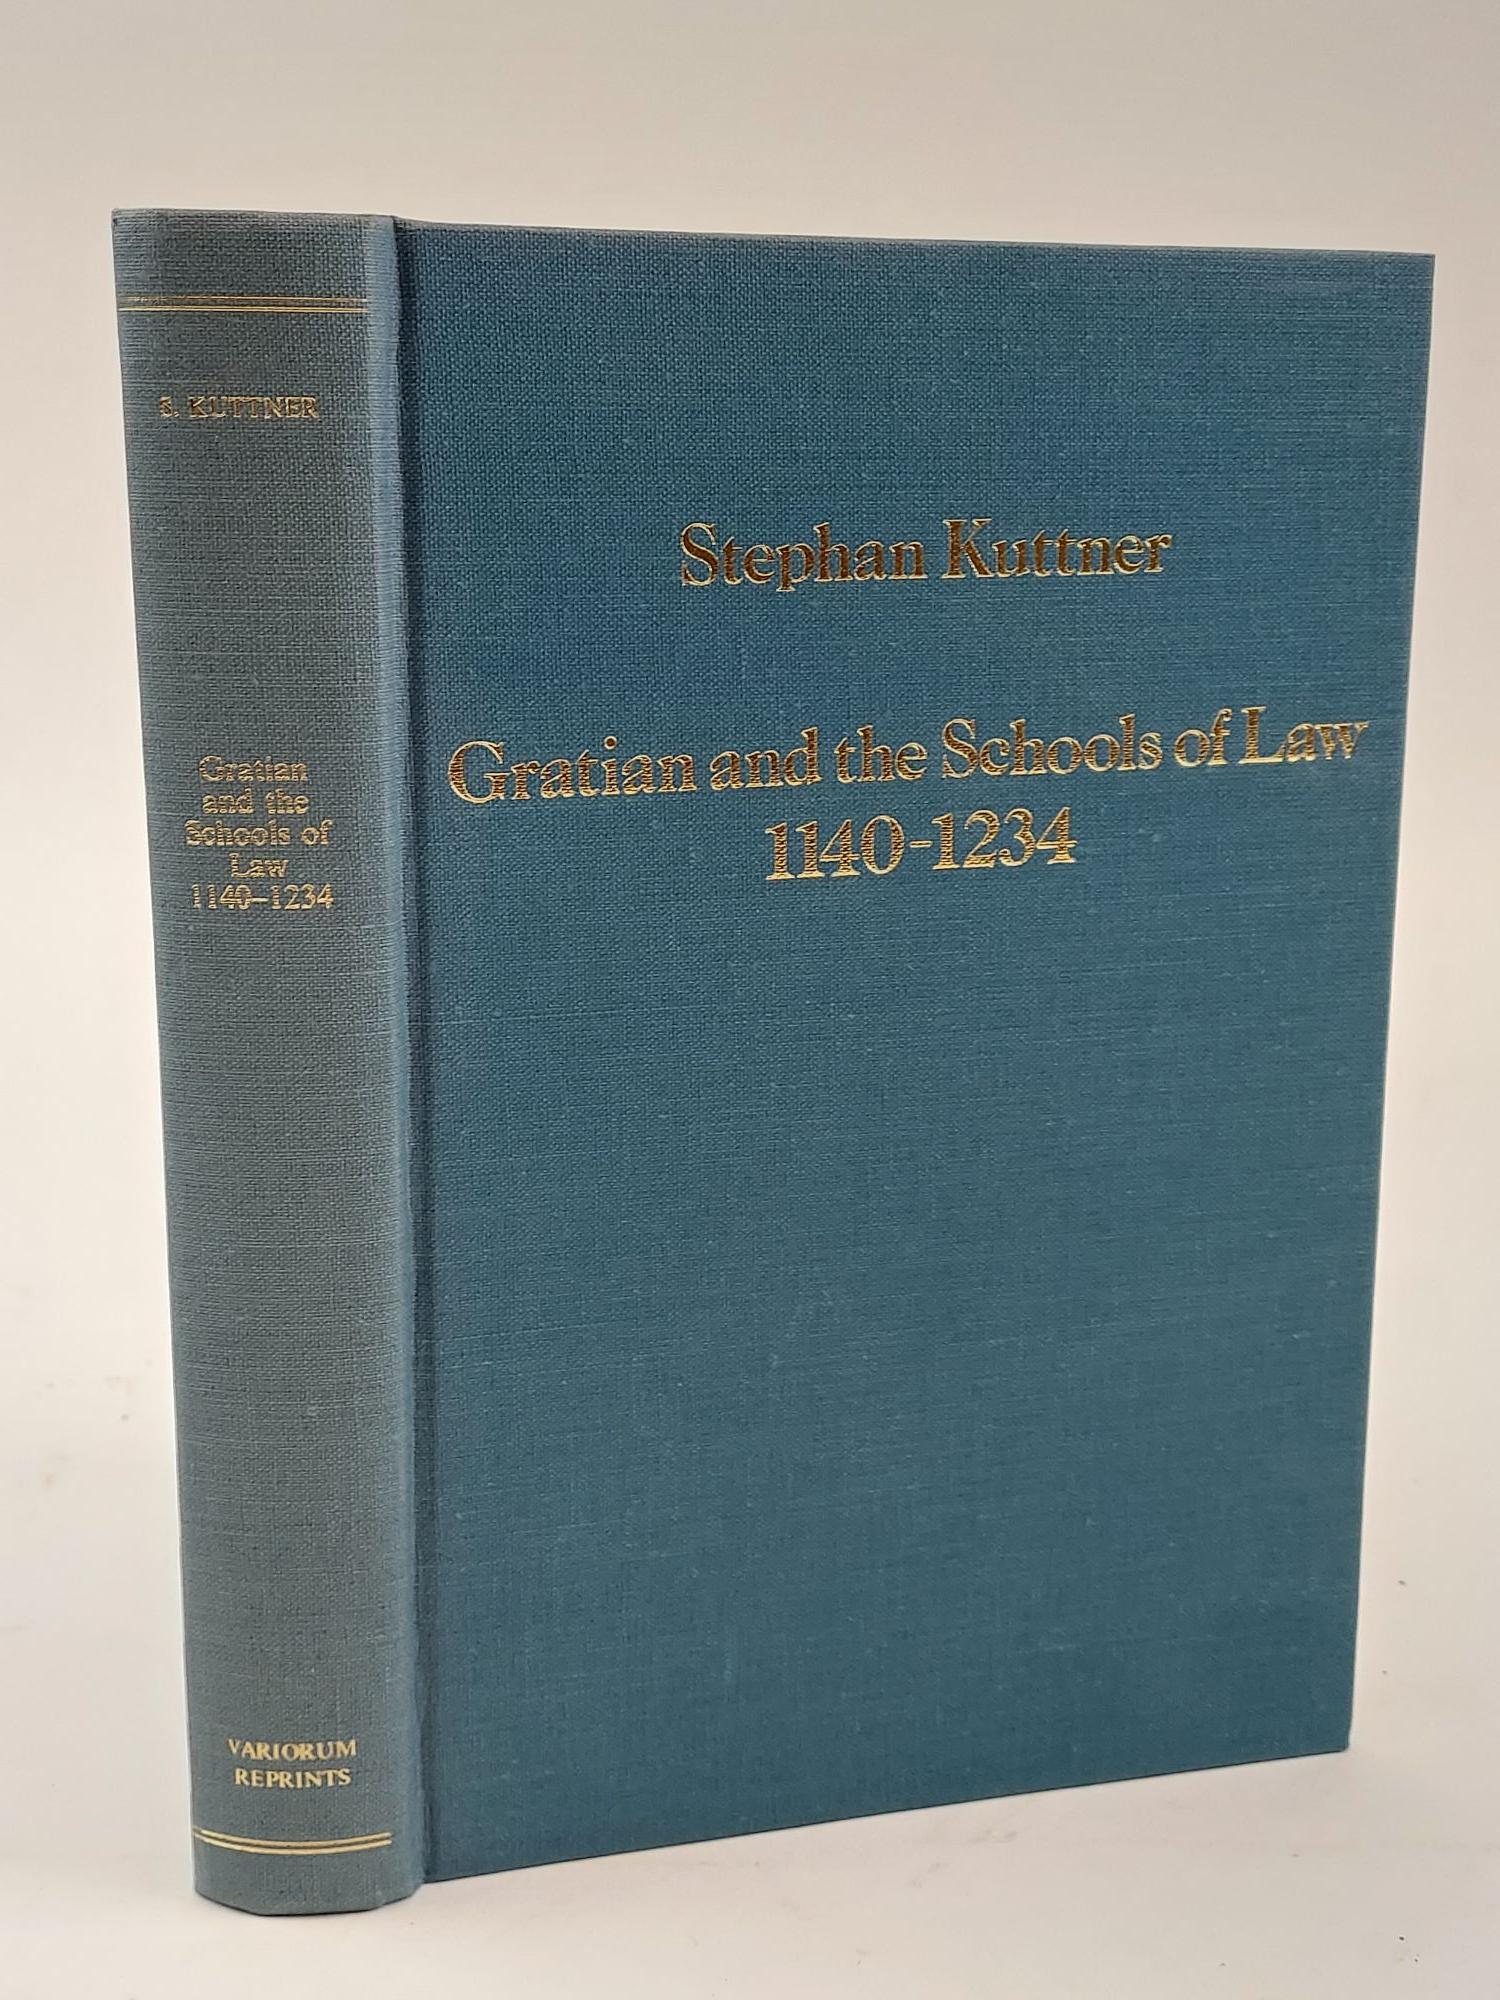 GRATIAN AND THE SCHOOLS OF LAW 1140-1234 - Kuttner, Stephan